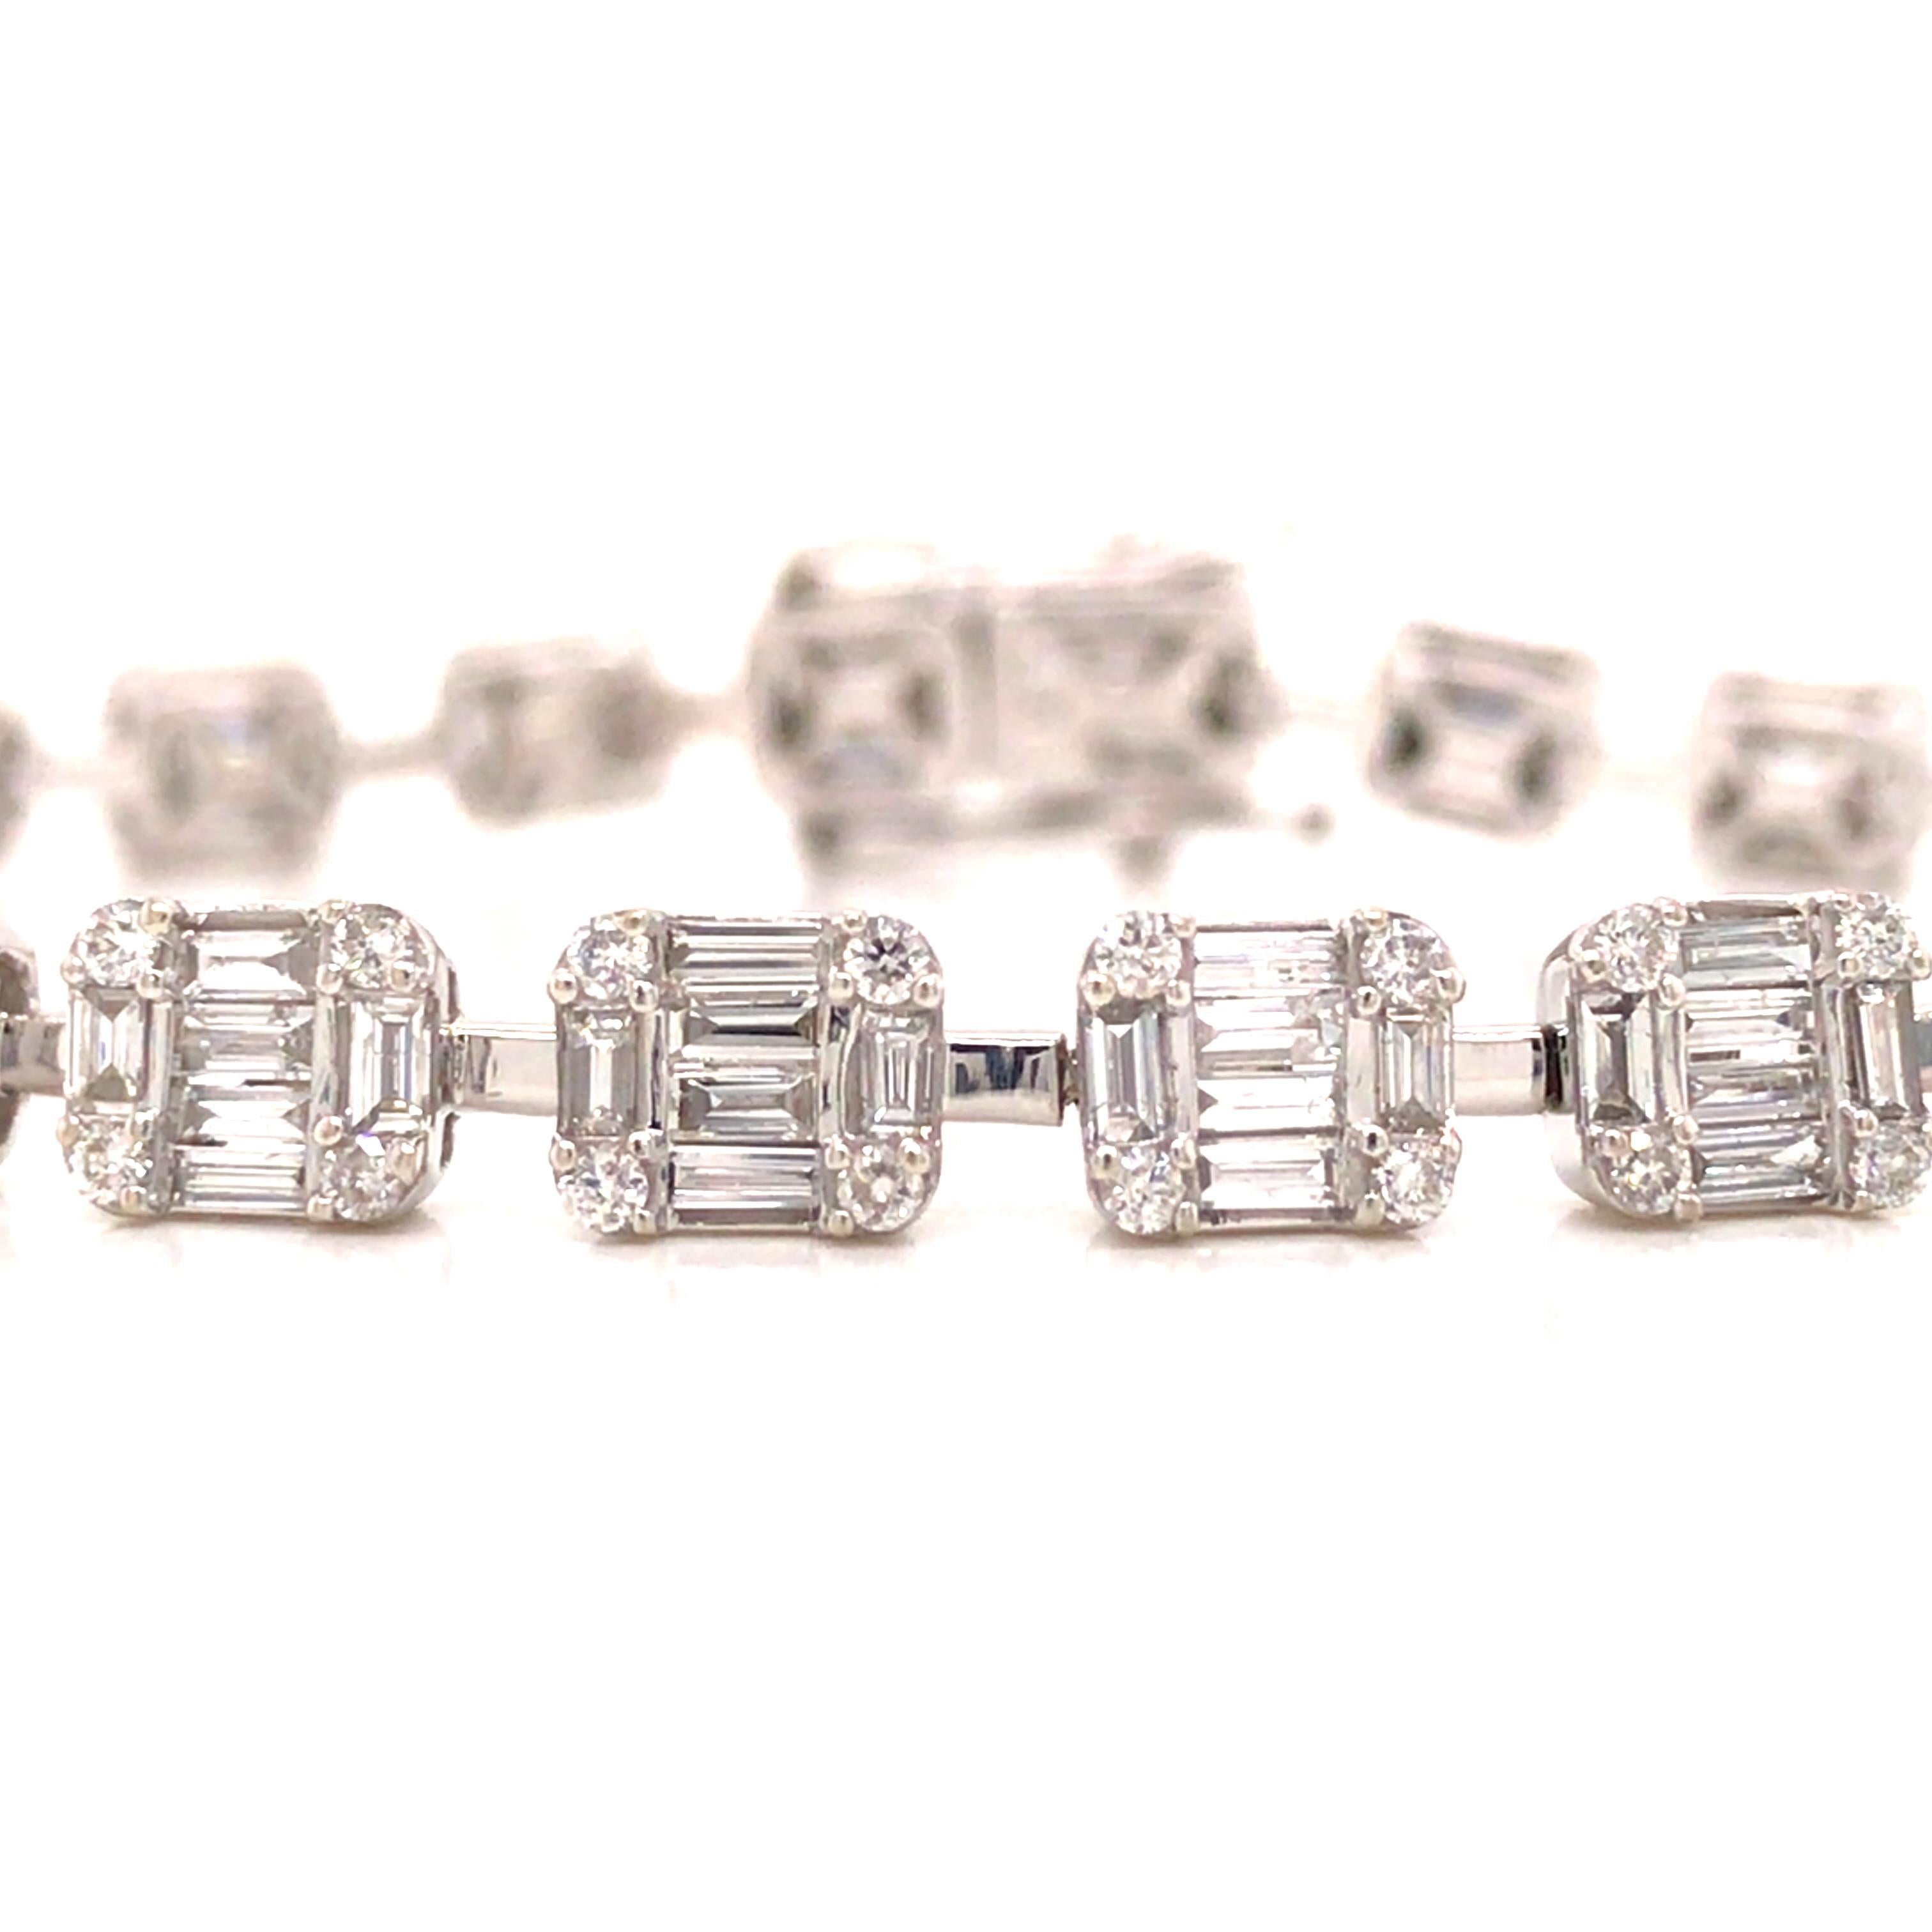 14K Round and Baguette Diamond Bracelet White Gold In New Condition For Sale In Boca Raton, FL